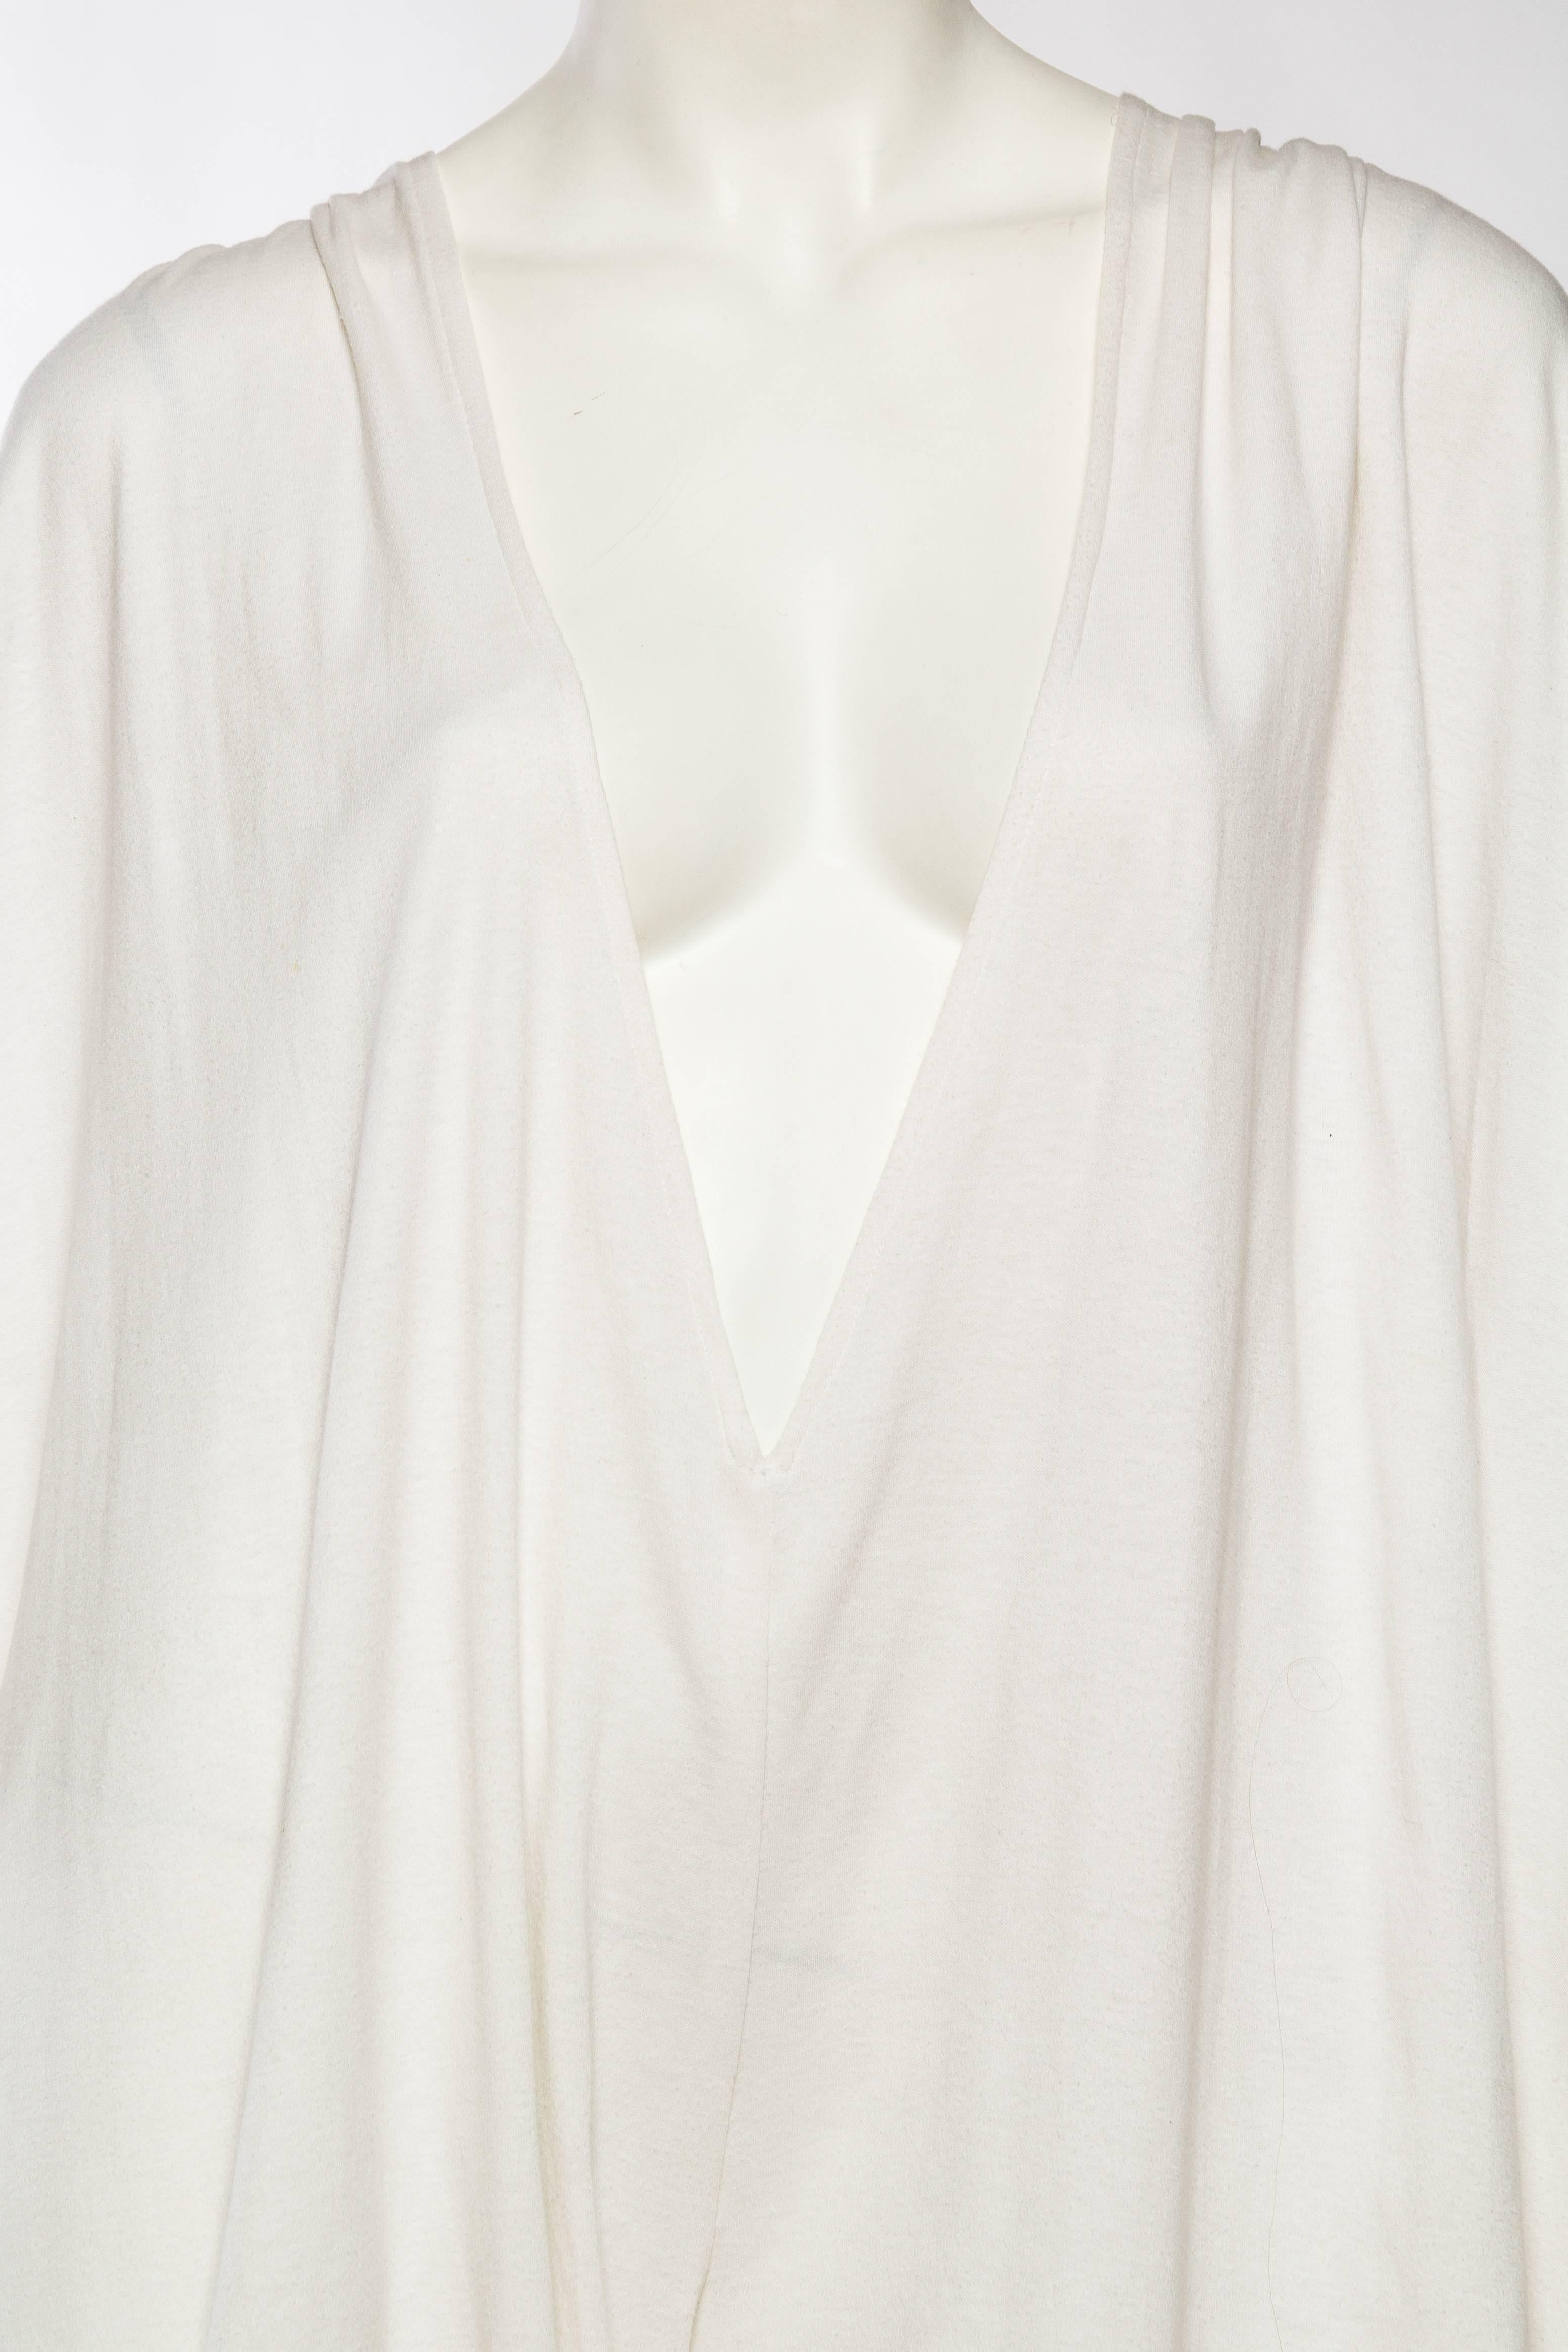 Early Norma Kamali from the 1970s Volumunous White Cotton Jersey Jumpsuit 3